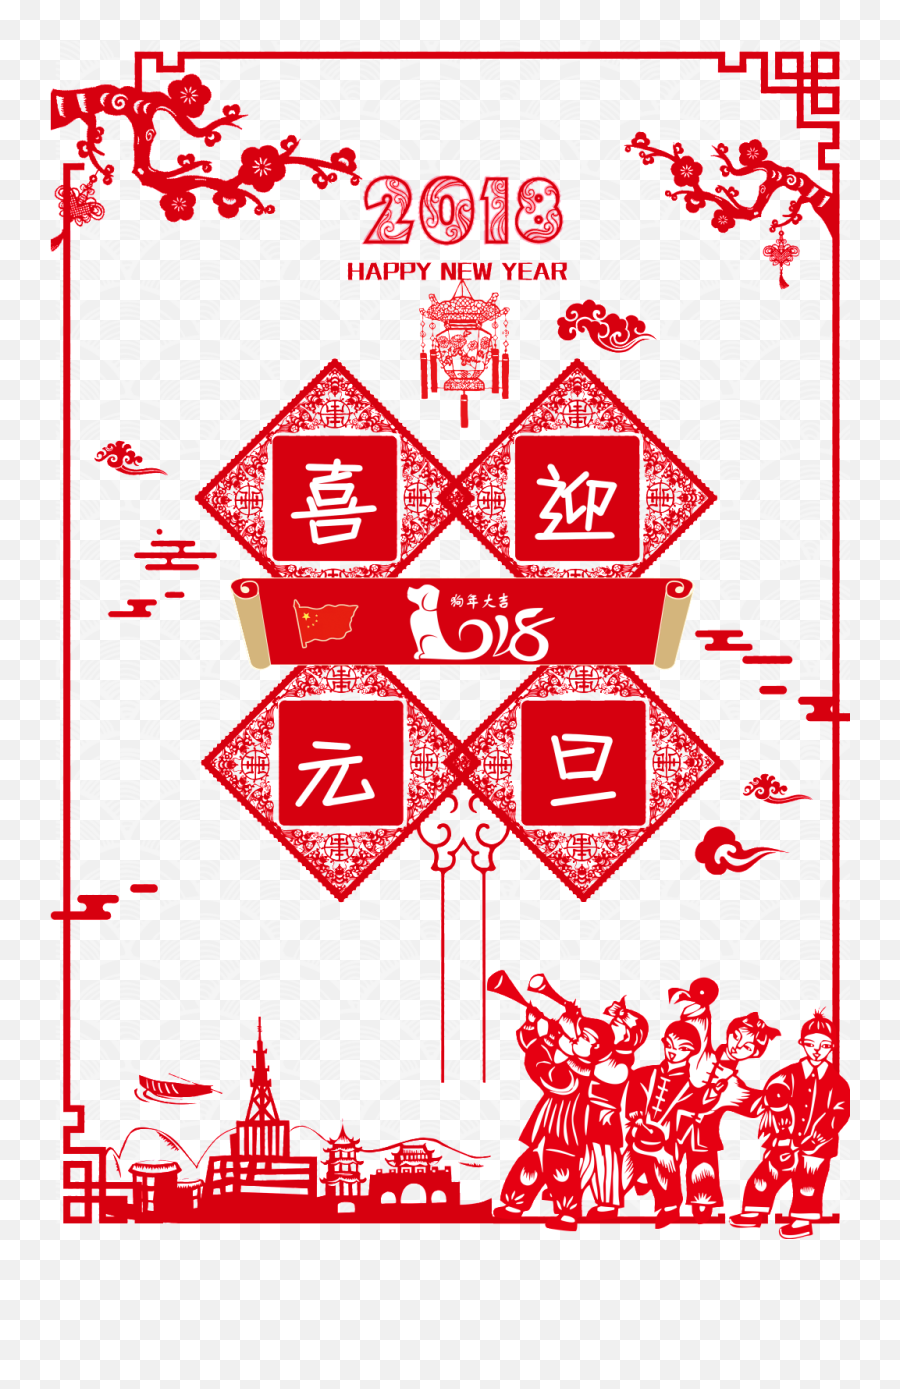 Celebrate New Years Day Red Border - Papercutting Emoji,Red Border Transparent